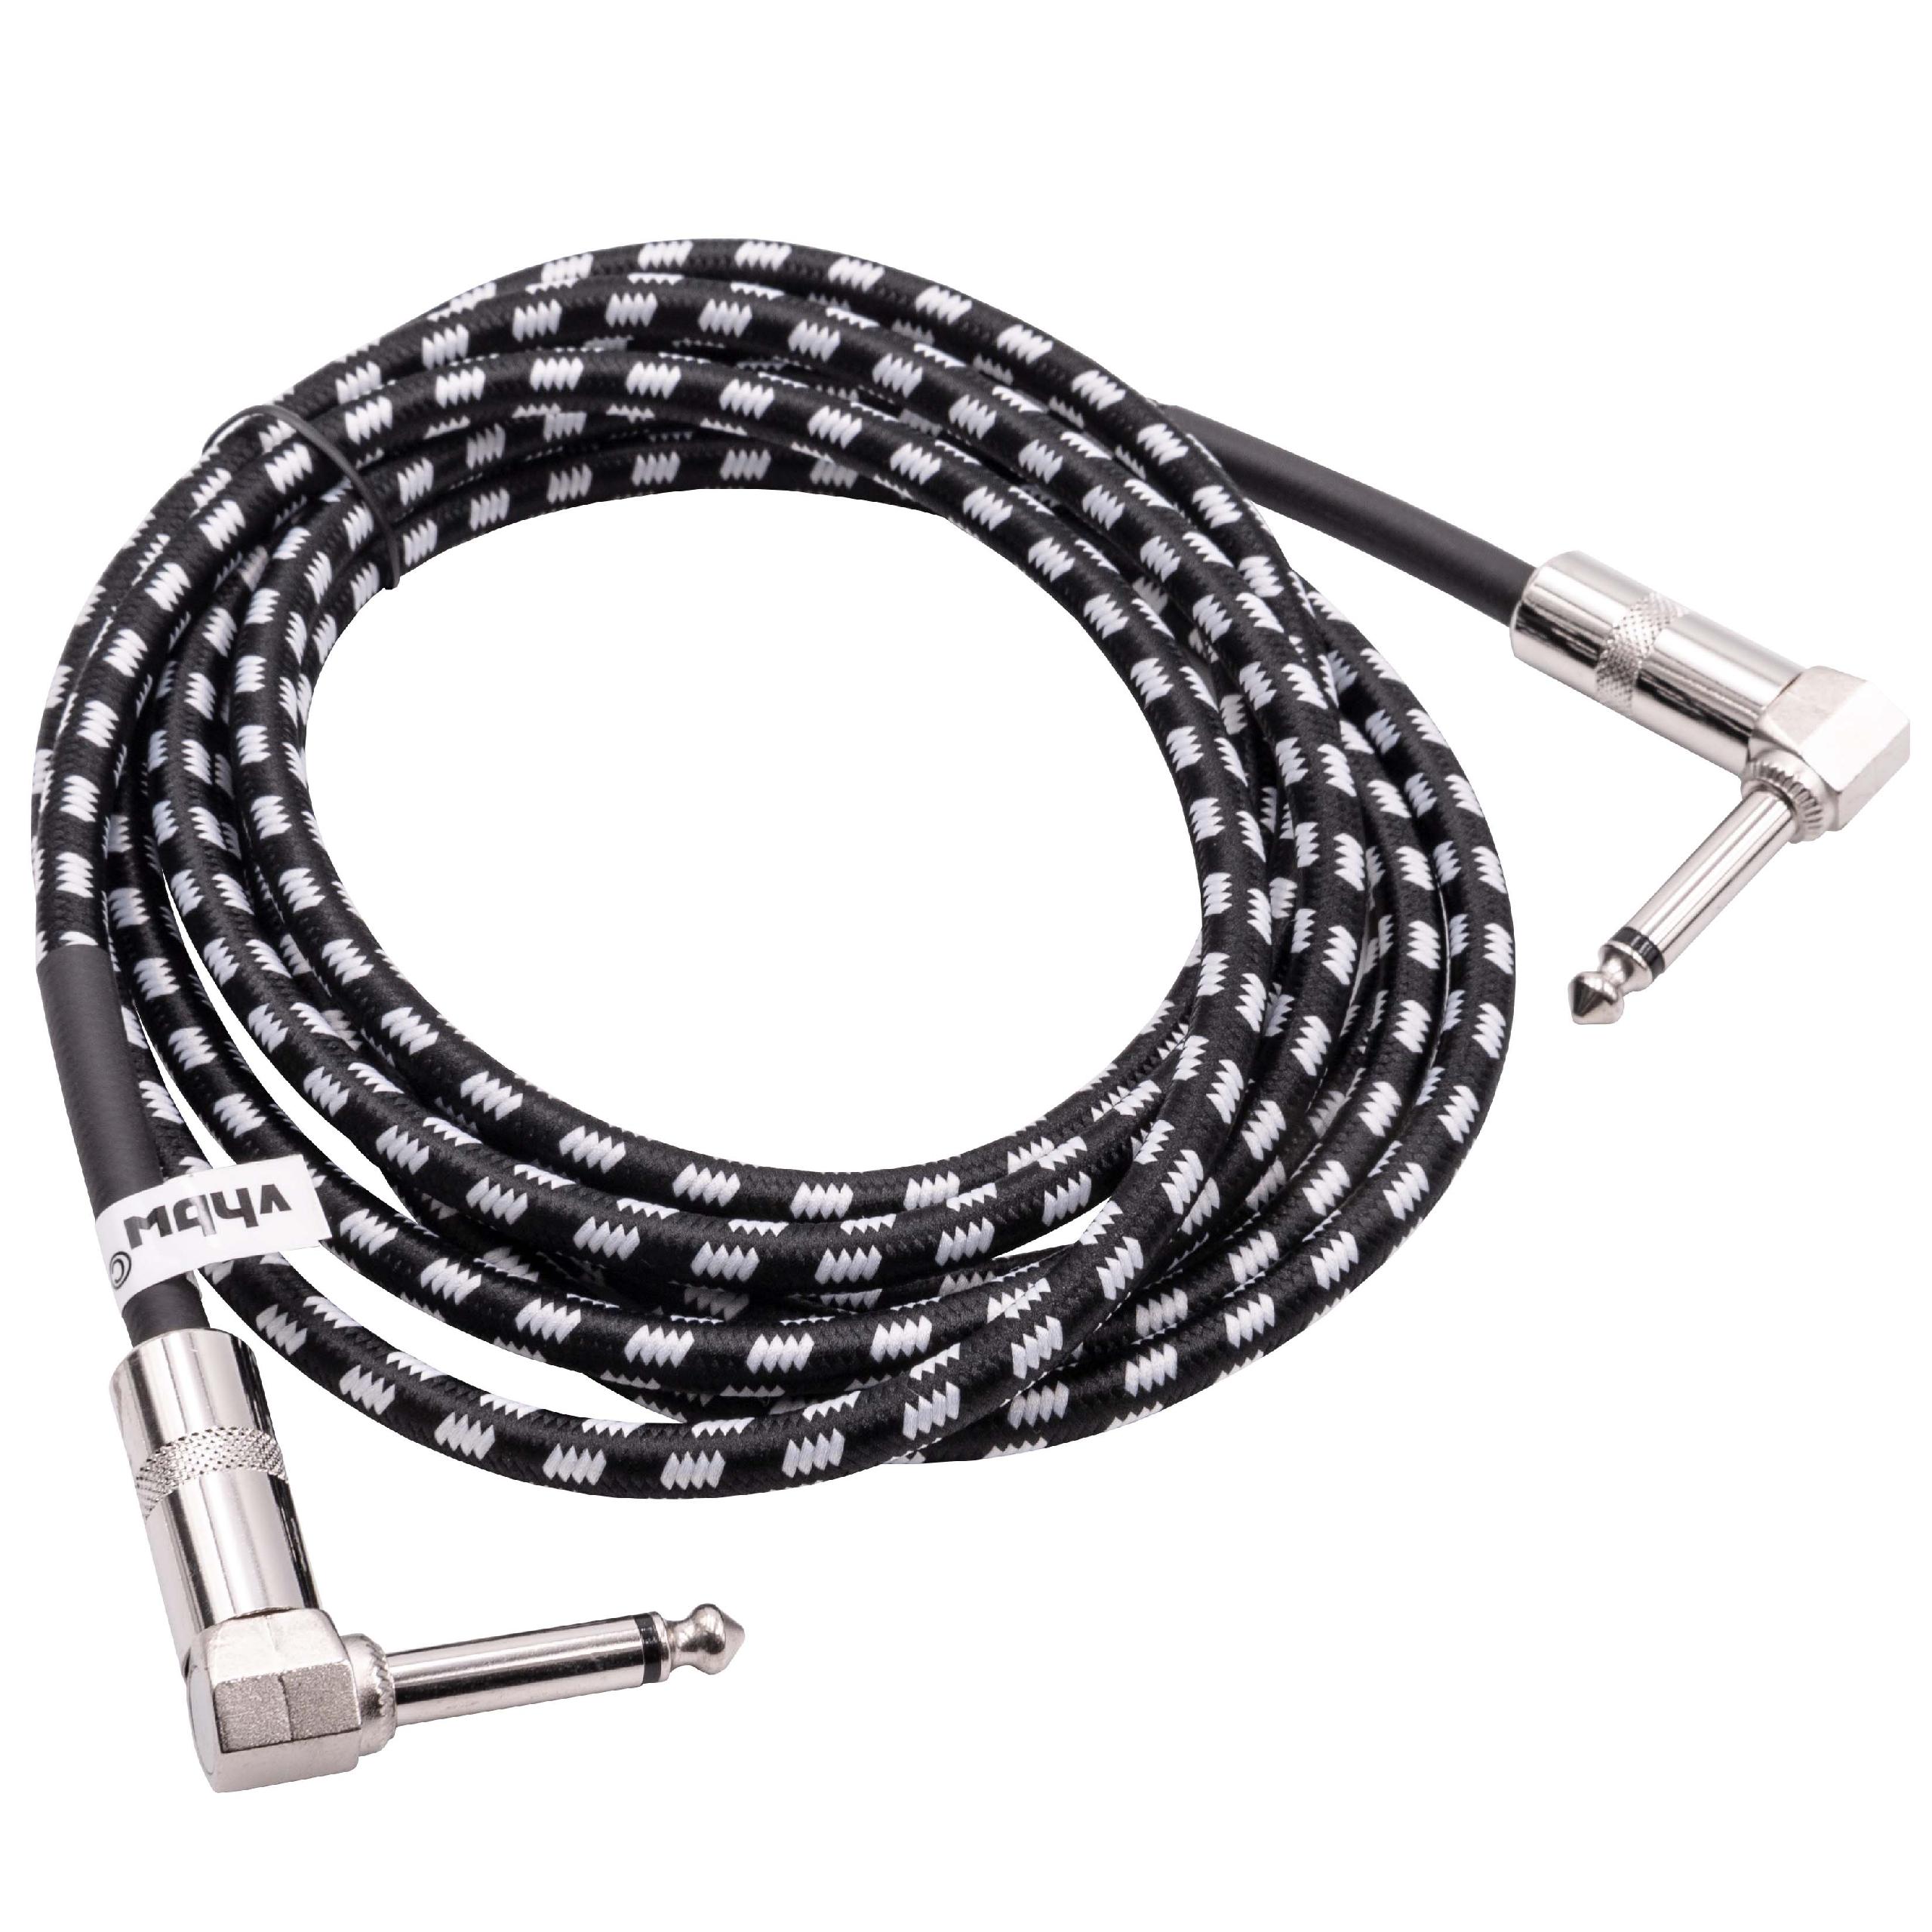 3m Guitar AUX Cable for Electric Guitar compatible with all 6.35mm Audio-Ports - Braided, Right Angle